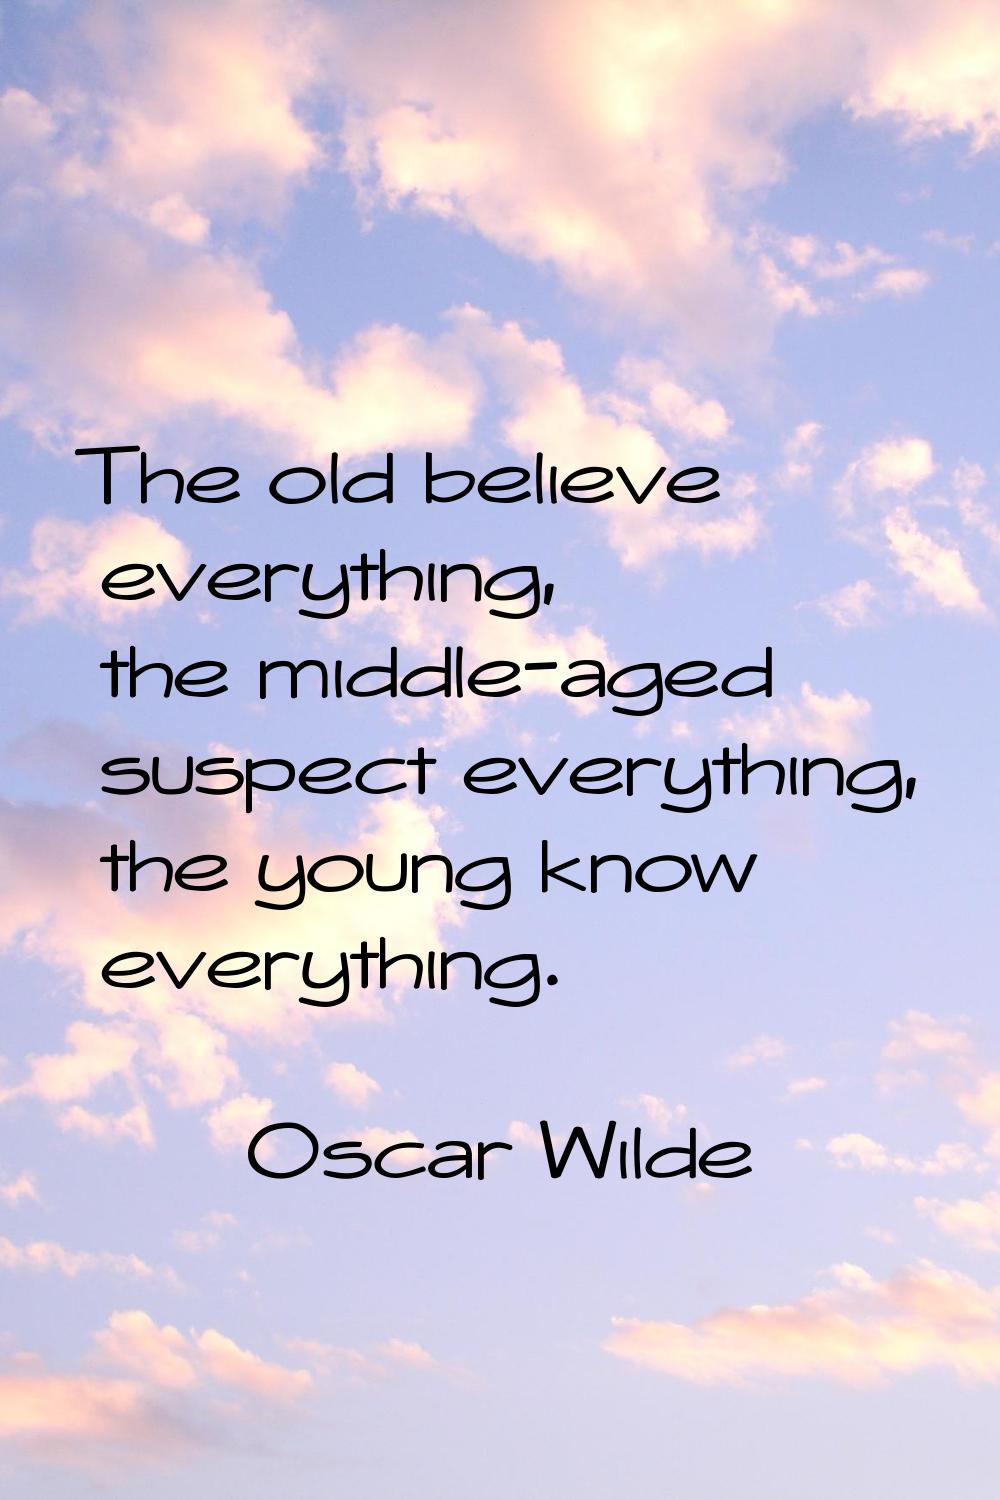 The old believe everything, the middle-aged suspect everything, the young know everything.